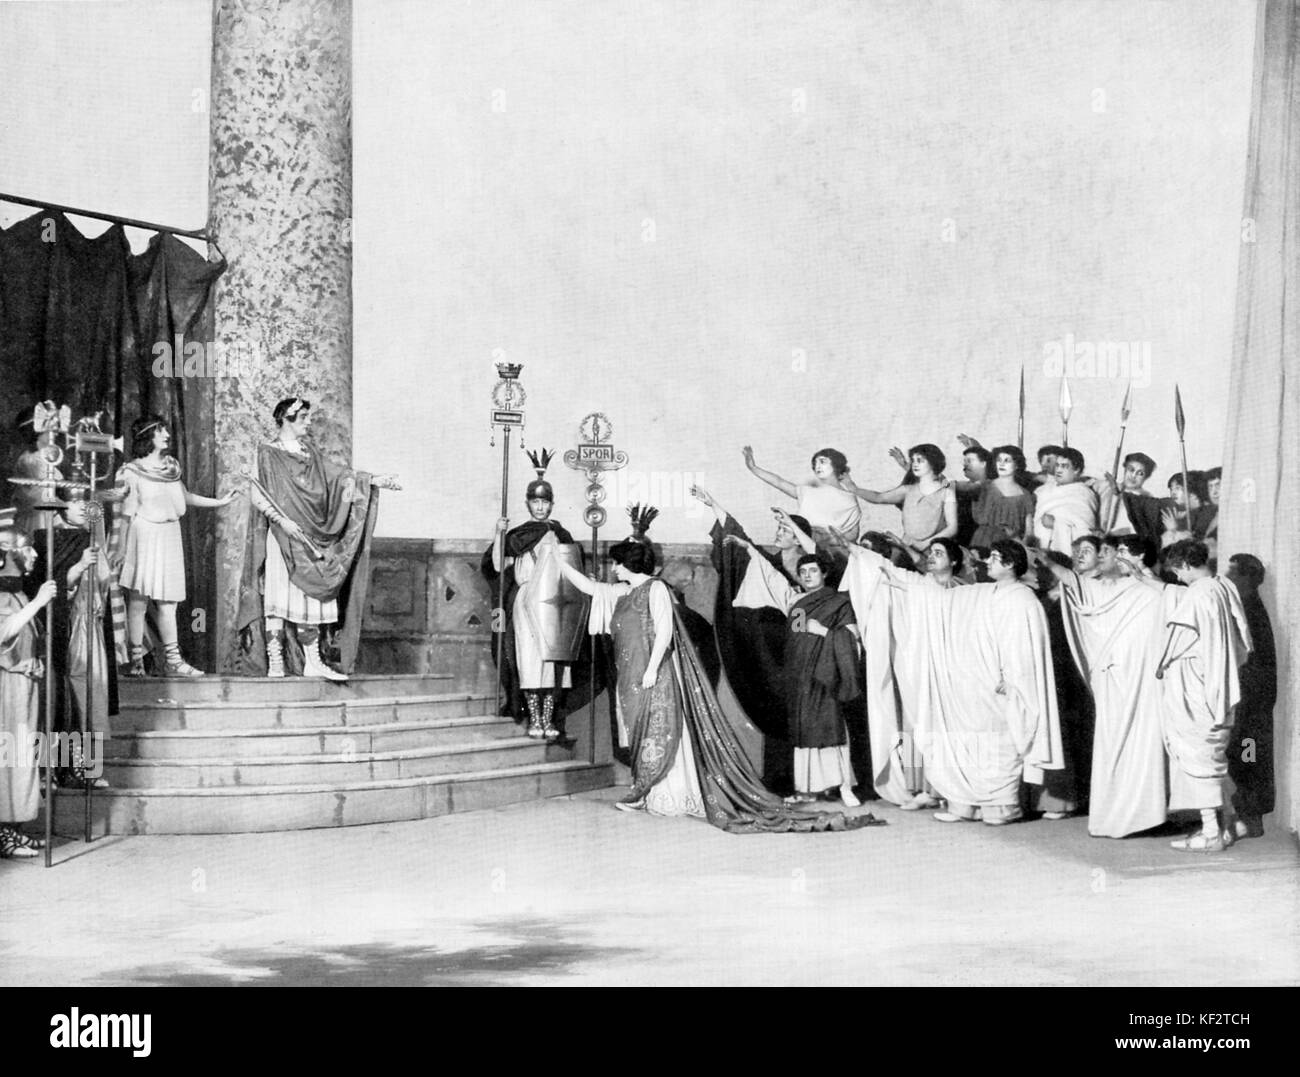 L'incoronazione di Poppea / The Coronation of Poppea - Italian baroque opera by Claudio Monteverdi. With Romanitza as the Page, Coulomb as Nero / Nerone and Croiza as Poppea, tableau 5. Set design by Charles Guerin. Performed at Theatre des Arts, 1913. Photo by Bert. CM: Italian composer, 15 May 1567 - 29 November 1643. Stock Photo